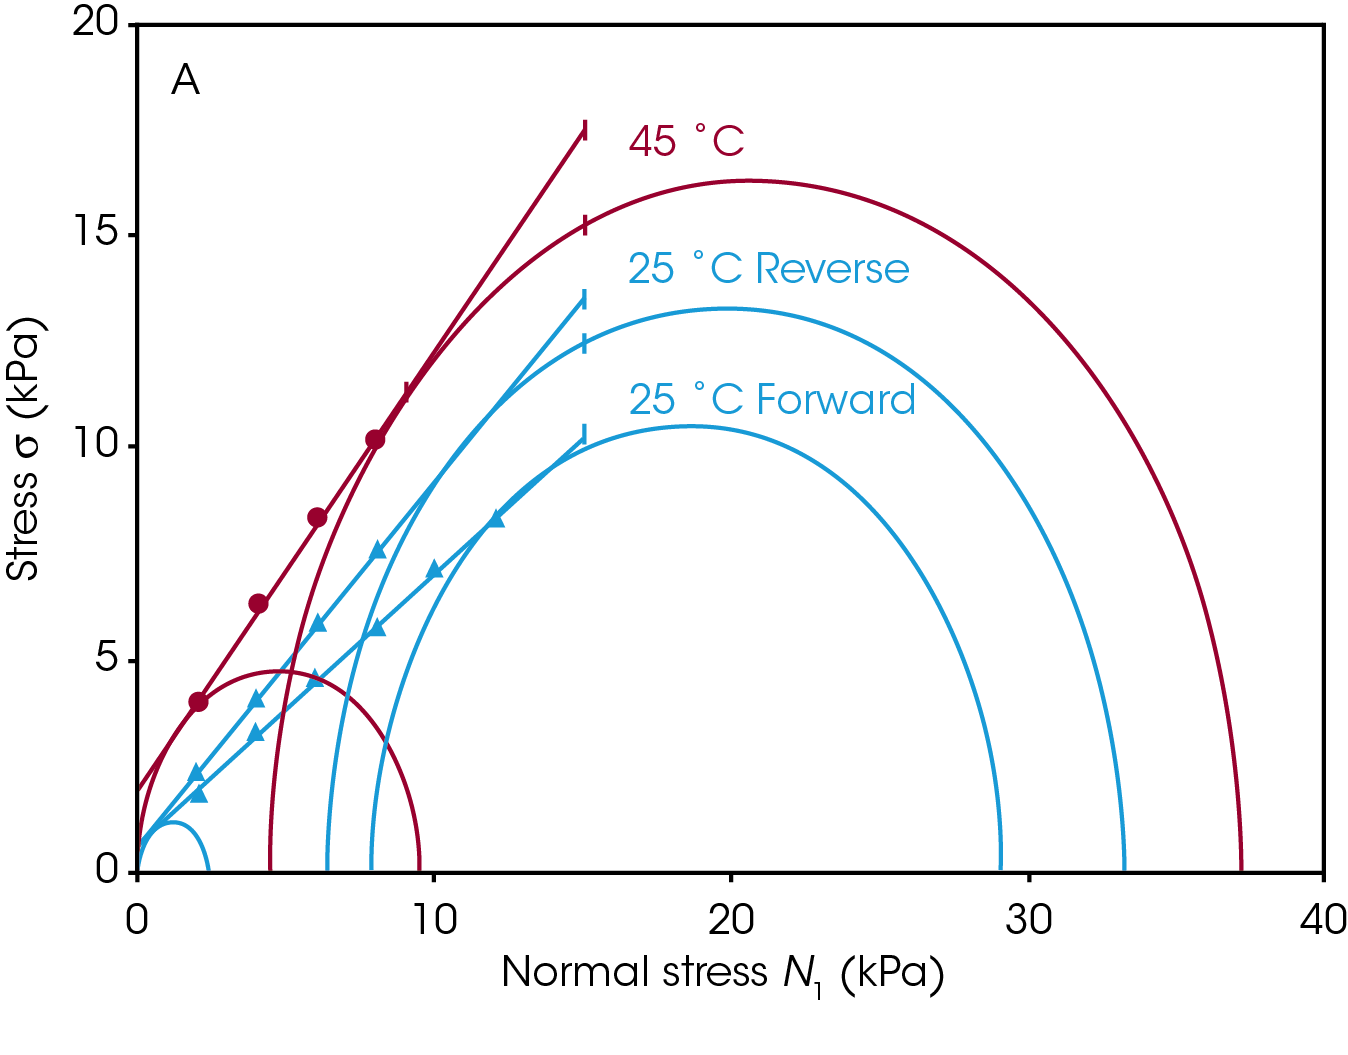 Figure 8. Temperature cycling results for A.) 25-45-25 °C and B.) 25-25-25 °C.